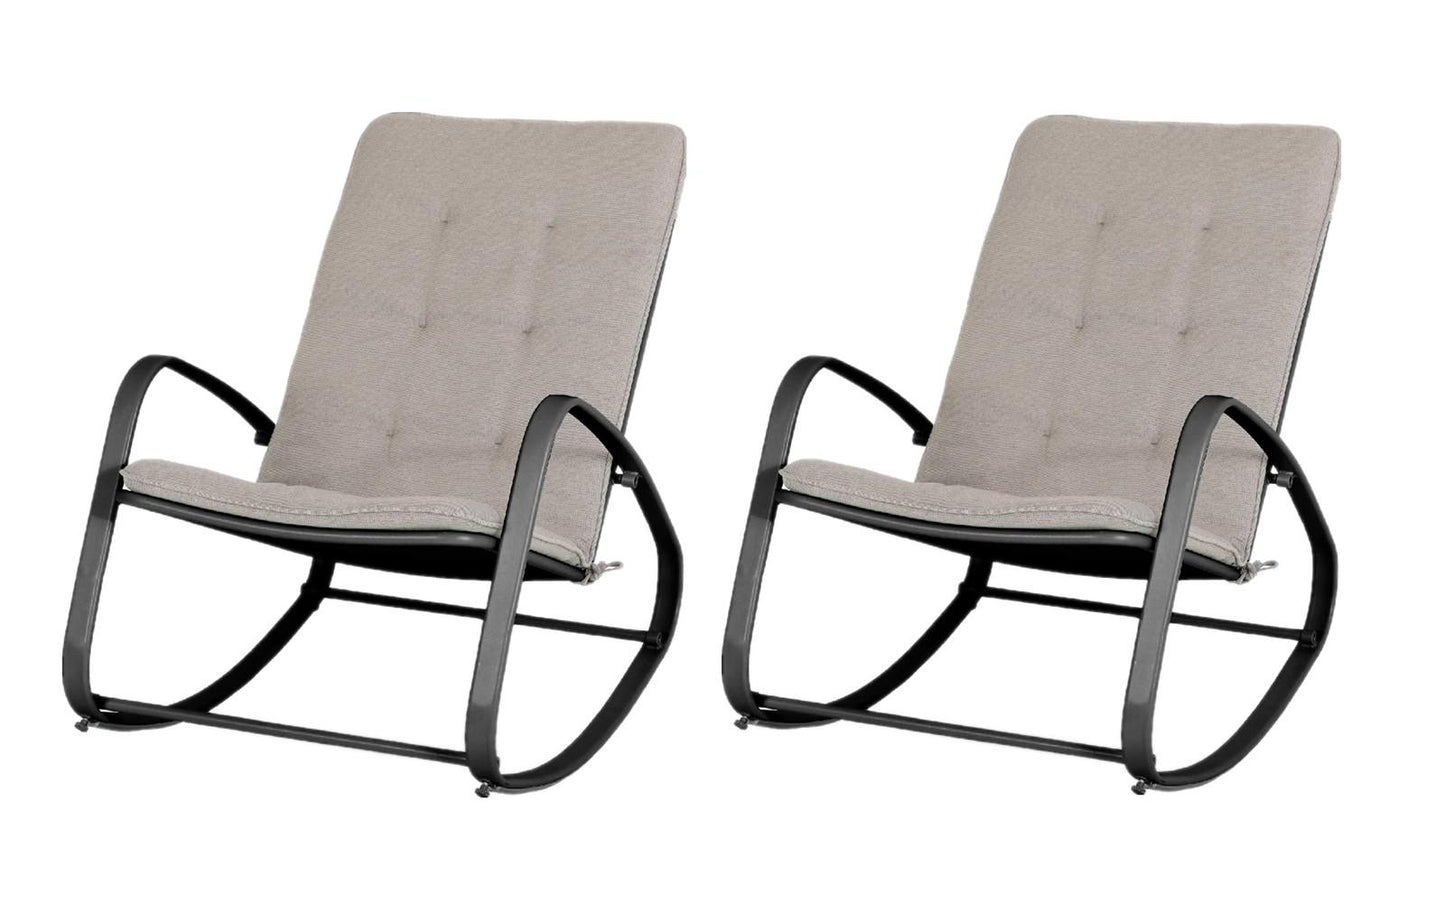 Sophia & William Set of 2 Outdoor Steel Rocking Chairs with Grey Pad - Black